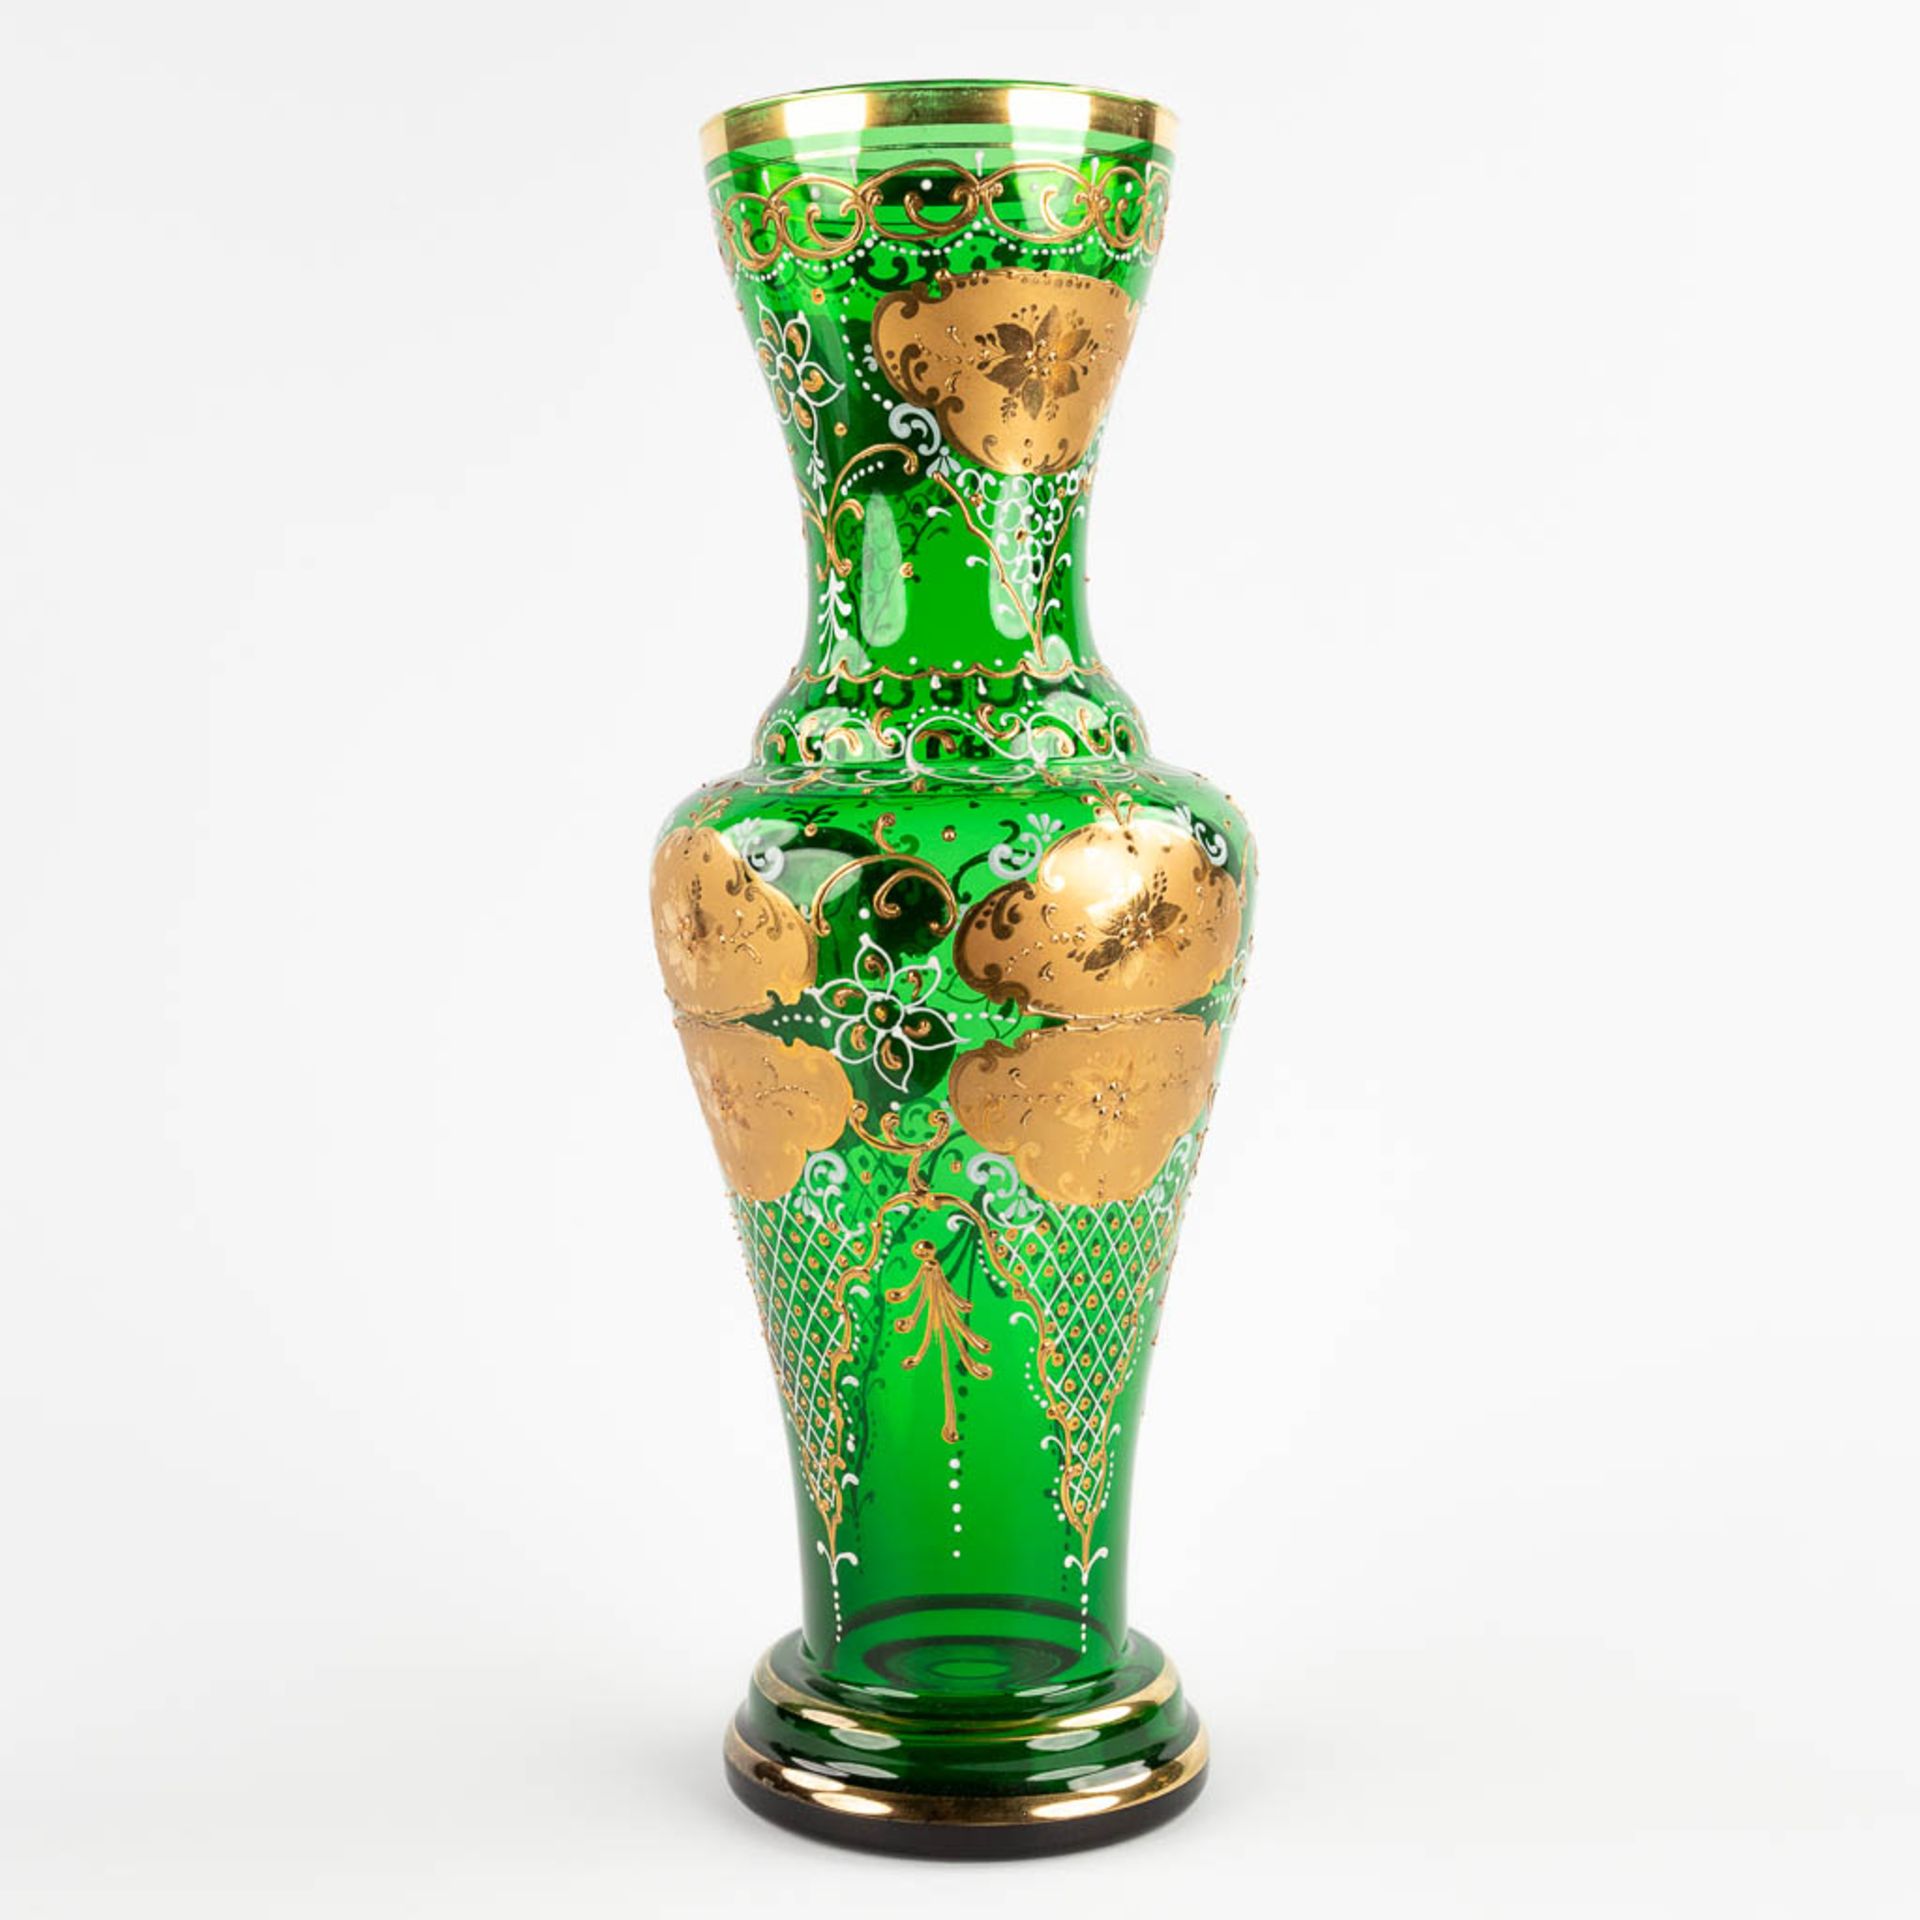 A fish and a vase, art glass, Murano, Italy. (H:44 x D:15 cm) - Image 5 of 21